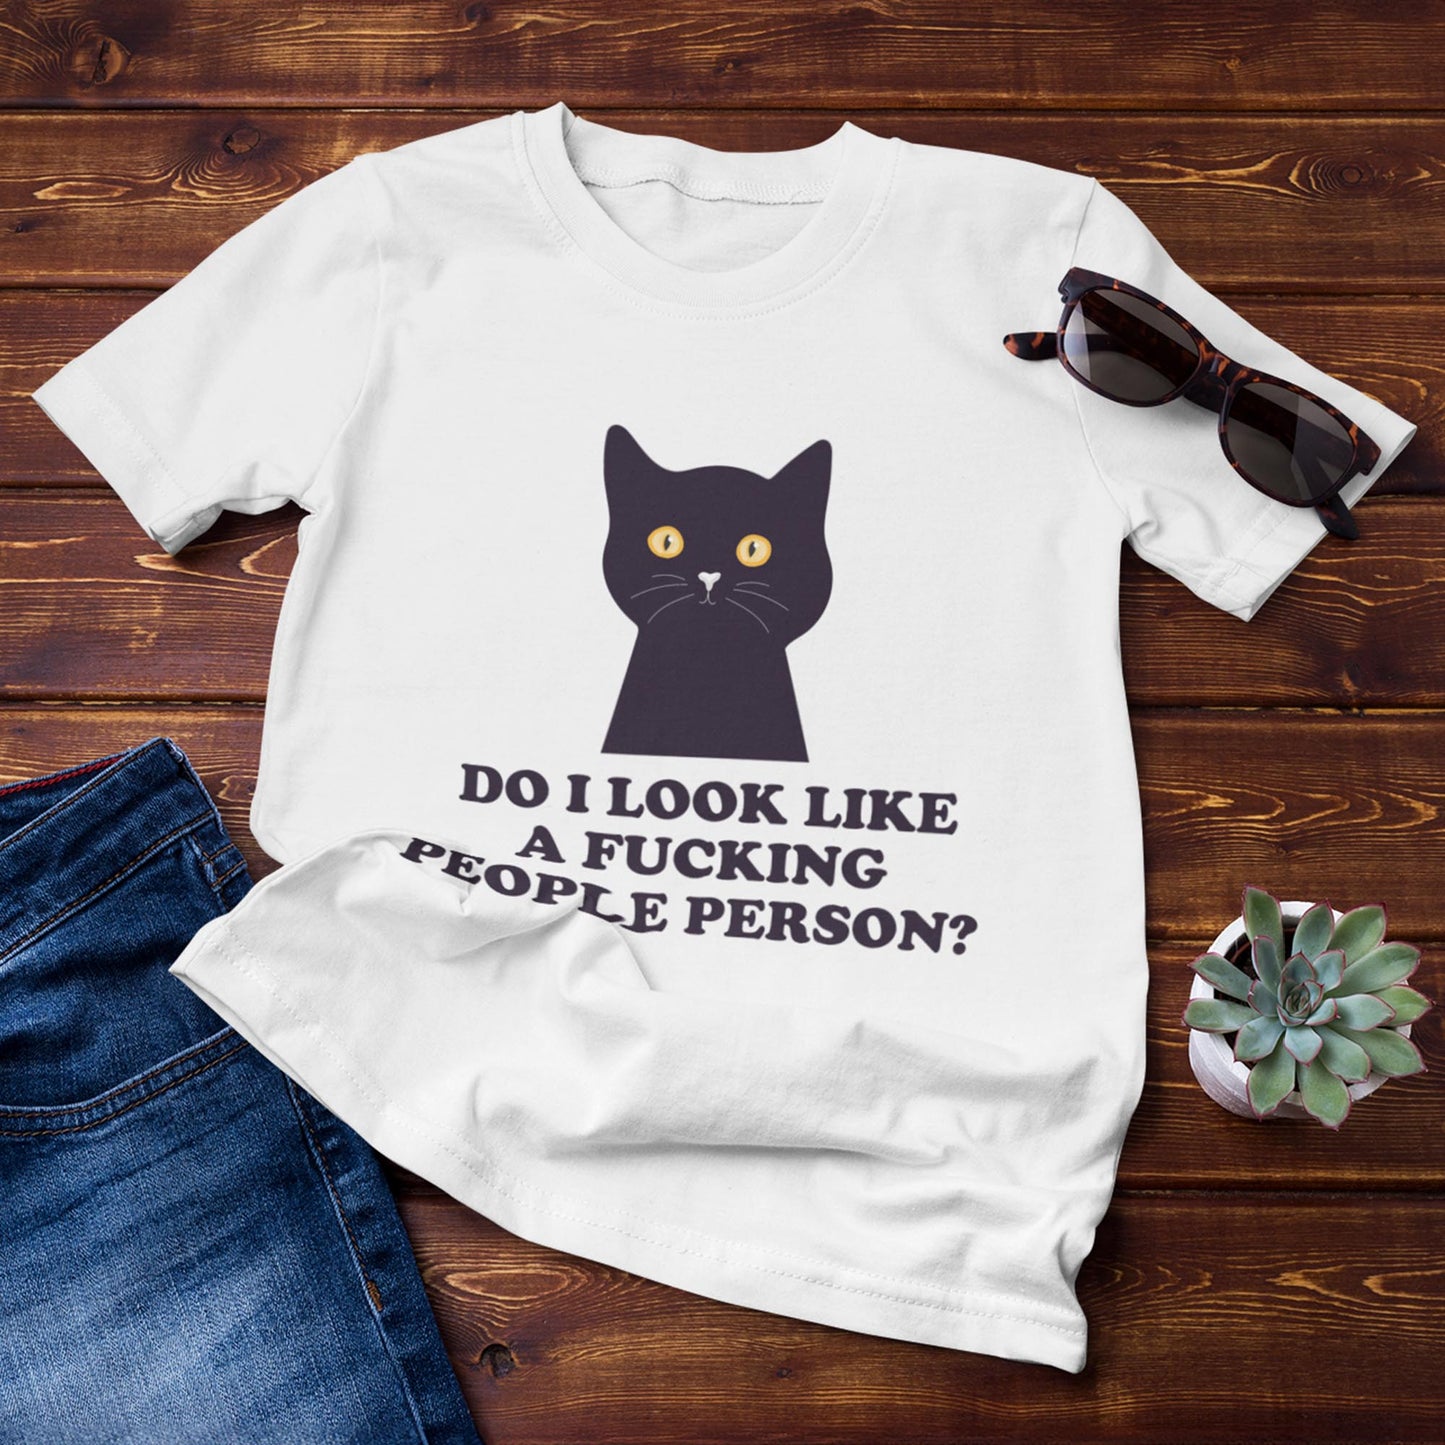 Do I Look Like A Fucking People Person? Unisex T-Shirt